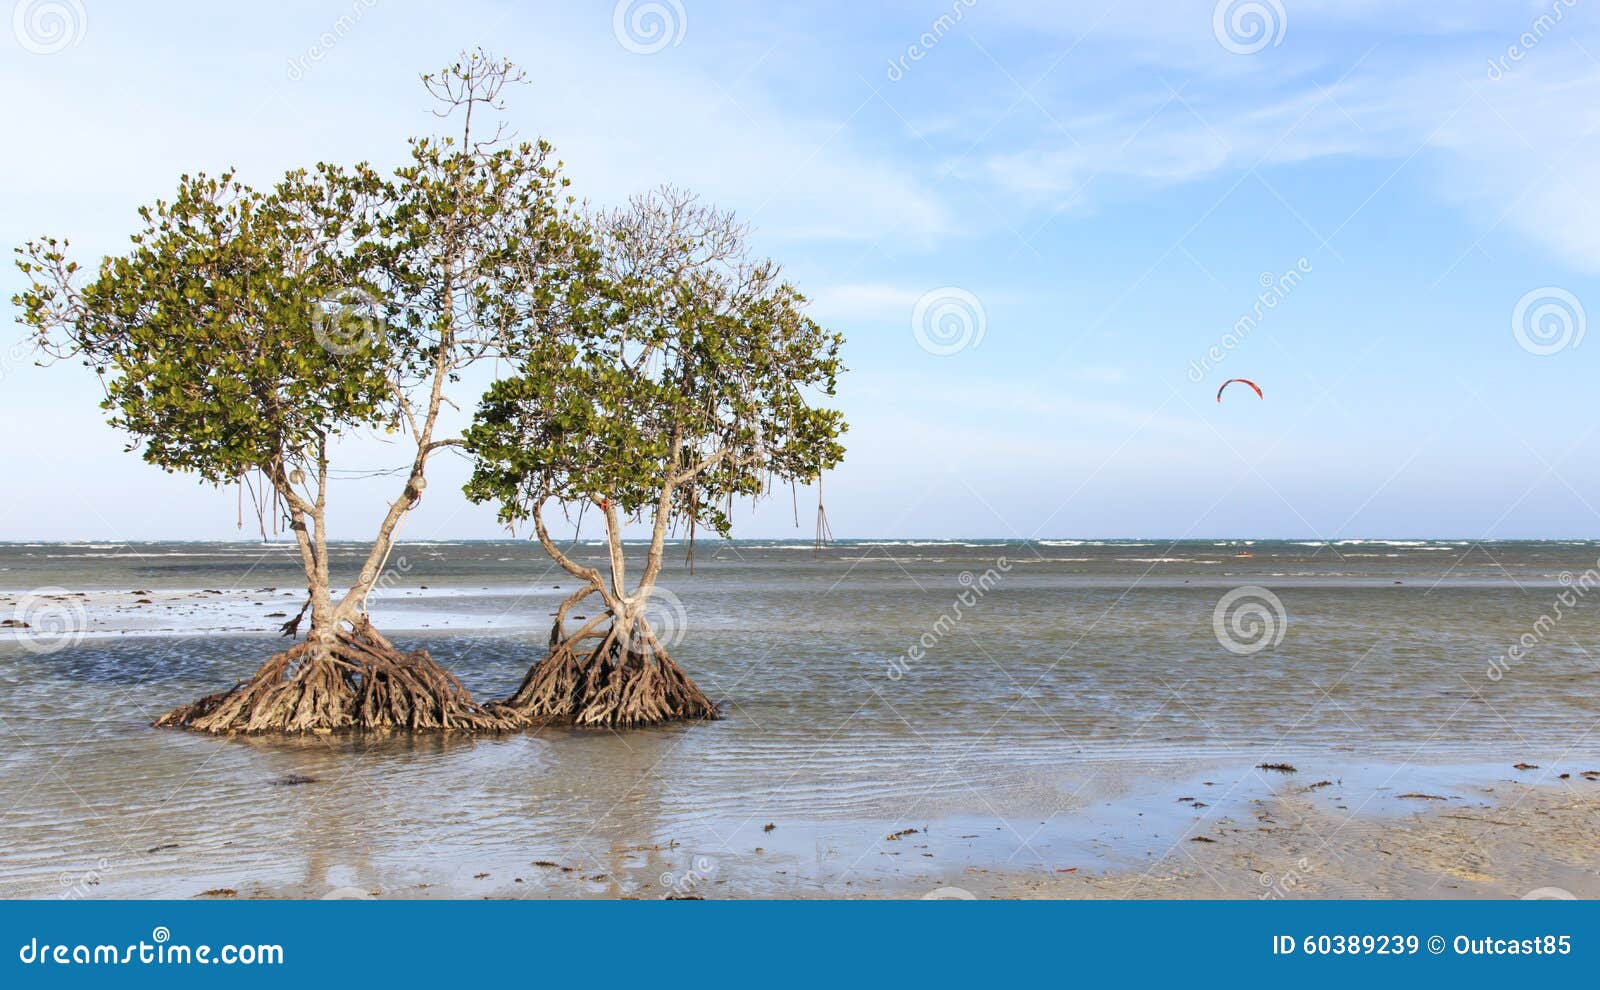 mangroves on a beach of puerto princesa, palawan in the philippines